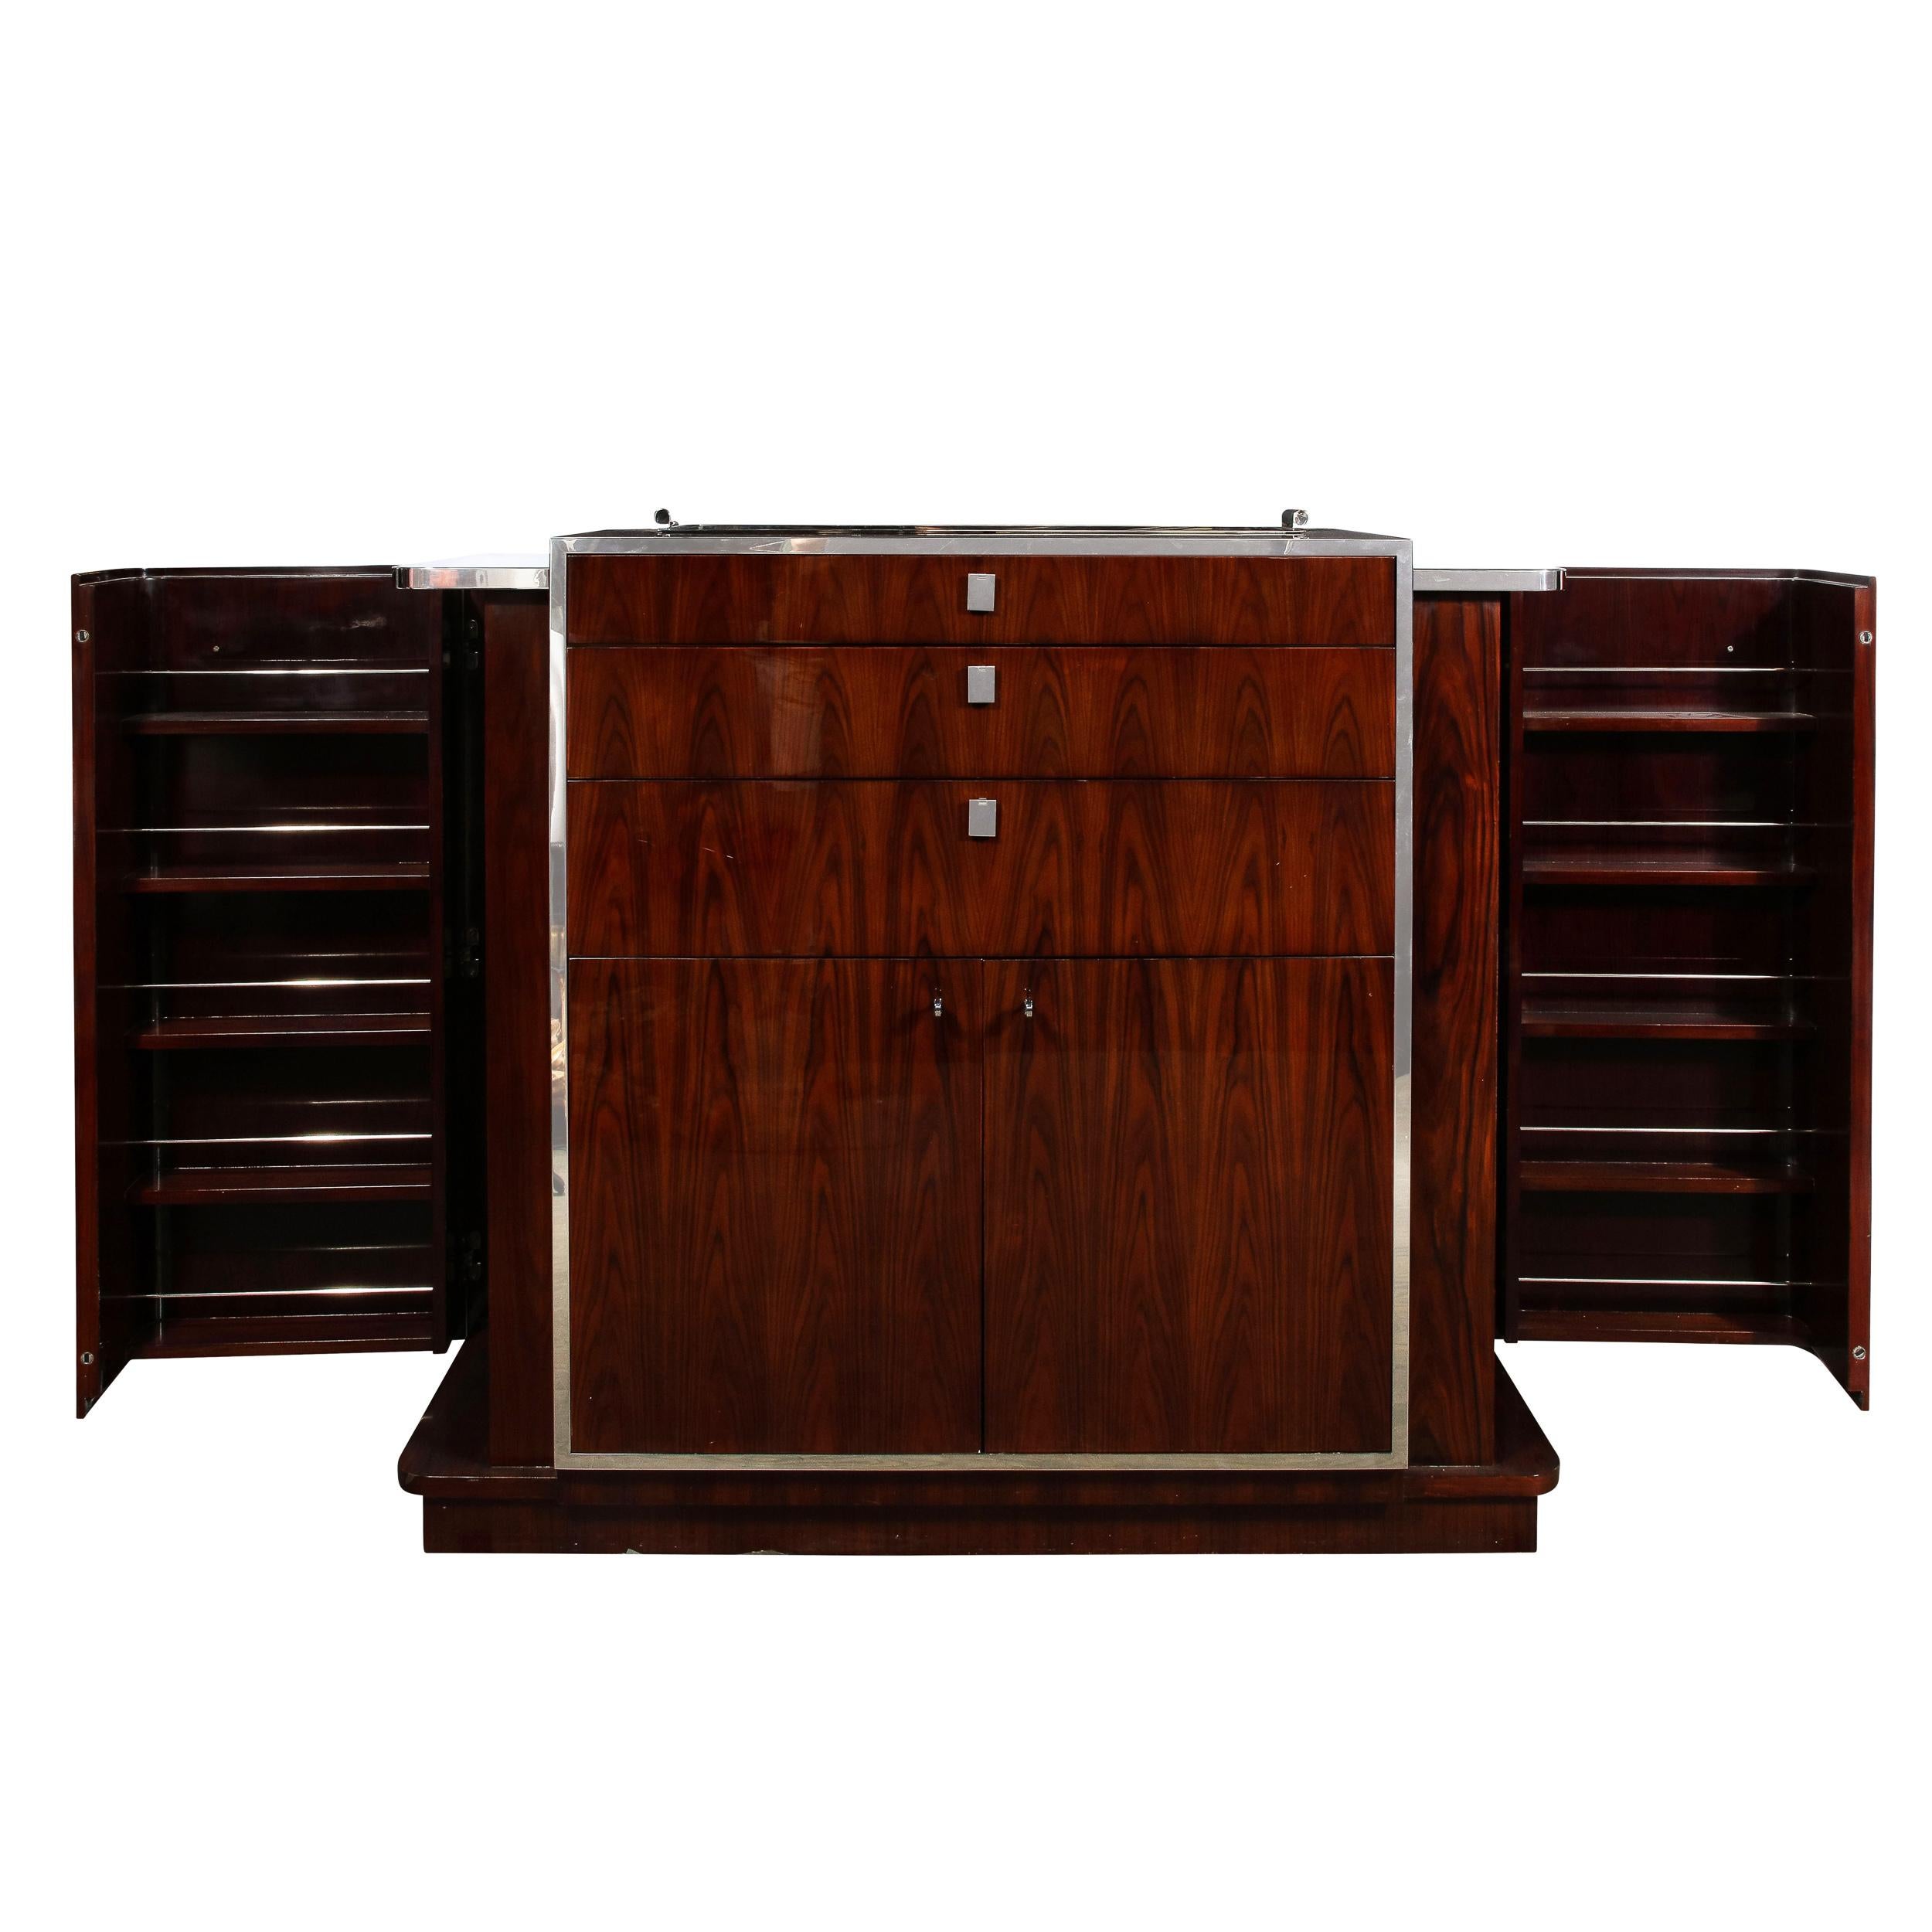 This elegant modernist bar cabinet was realized by Ralph Lauren- the visionary designer of clothing and homeware that, as much as anyone else of the 20th century, defined modern American style. This bar cart- meticulously realized in bookmatched